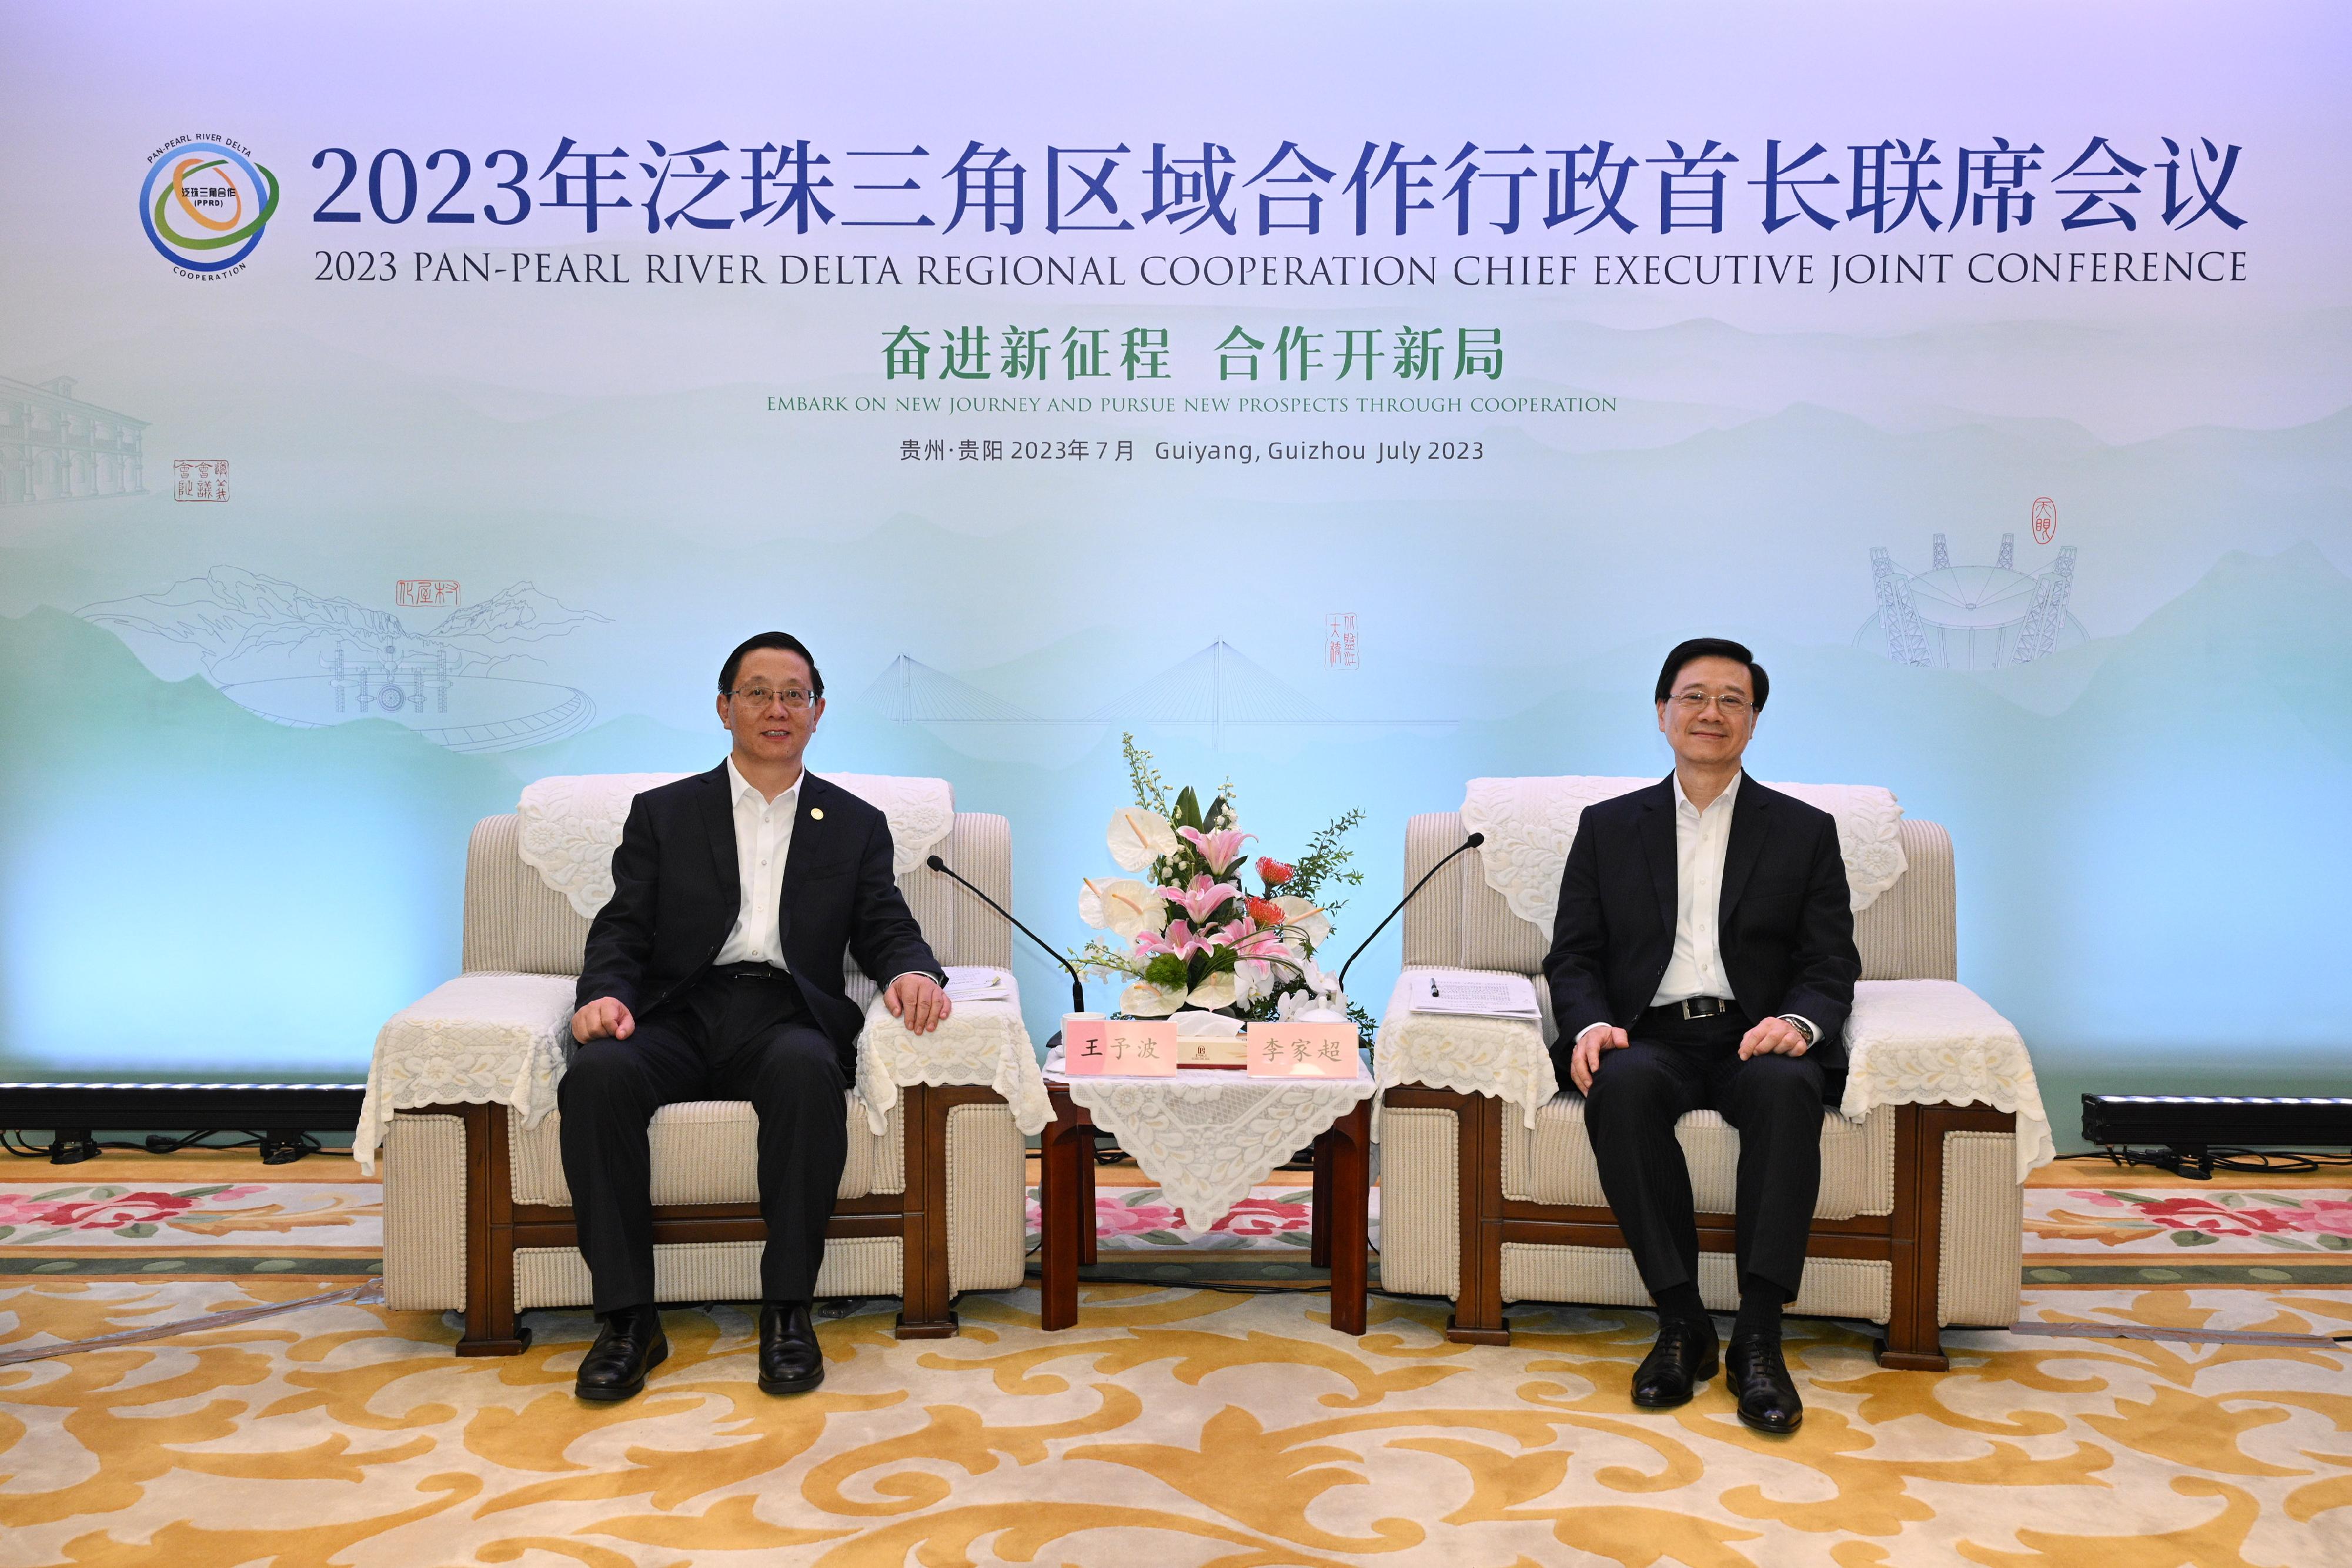 The Chief Executive, Mr John Lee, led a delegation to start his visit programme in Guiyang today (July 6). Photo shows Mr Lee (right) and the Governor of Yunnan Province, Mr Wang Yubo (left), at a bilateral meeting in Guiyang.